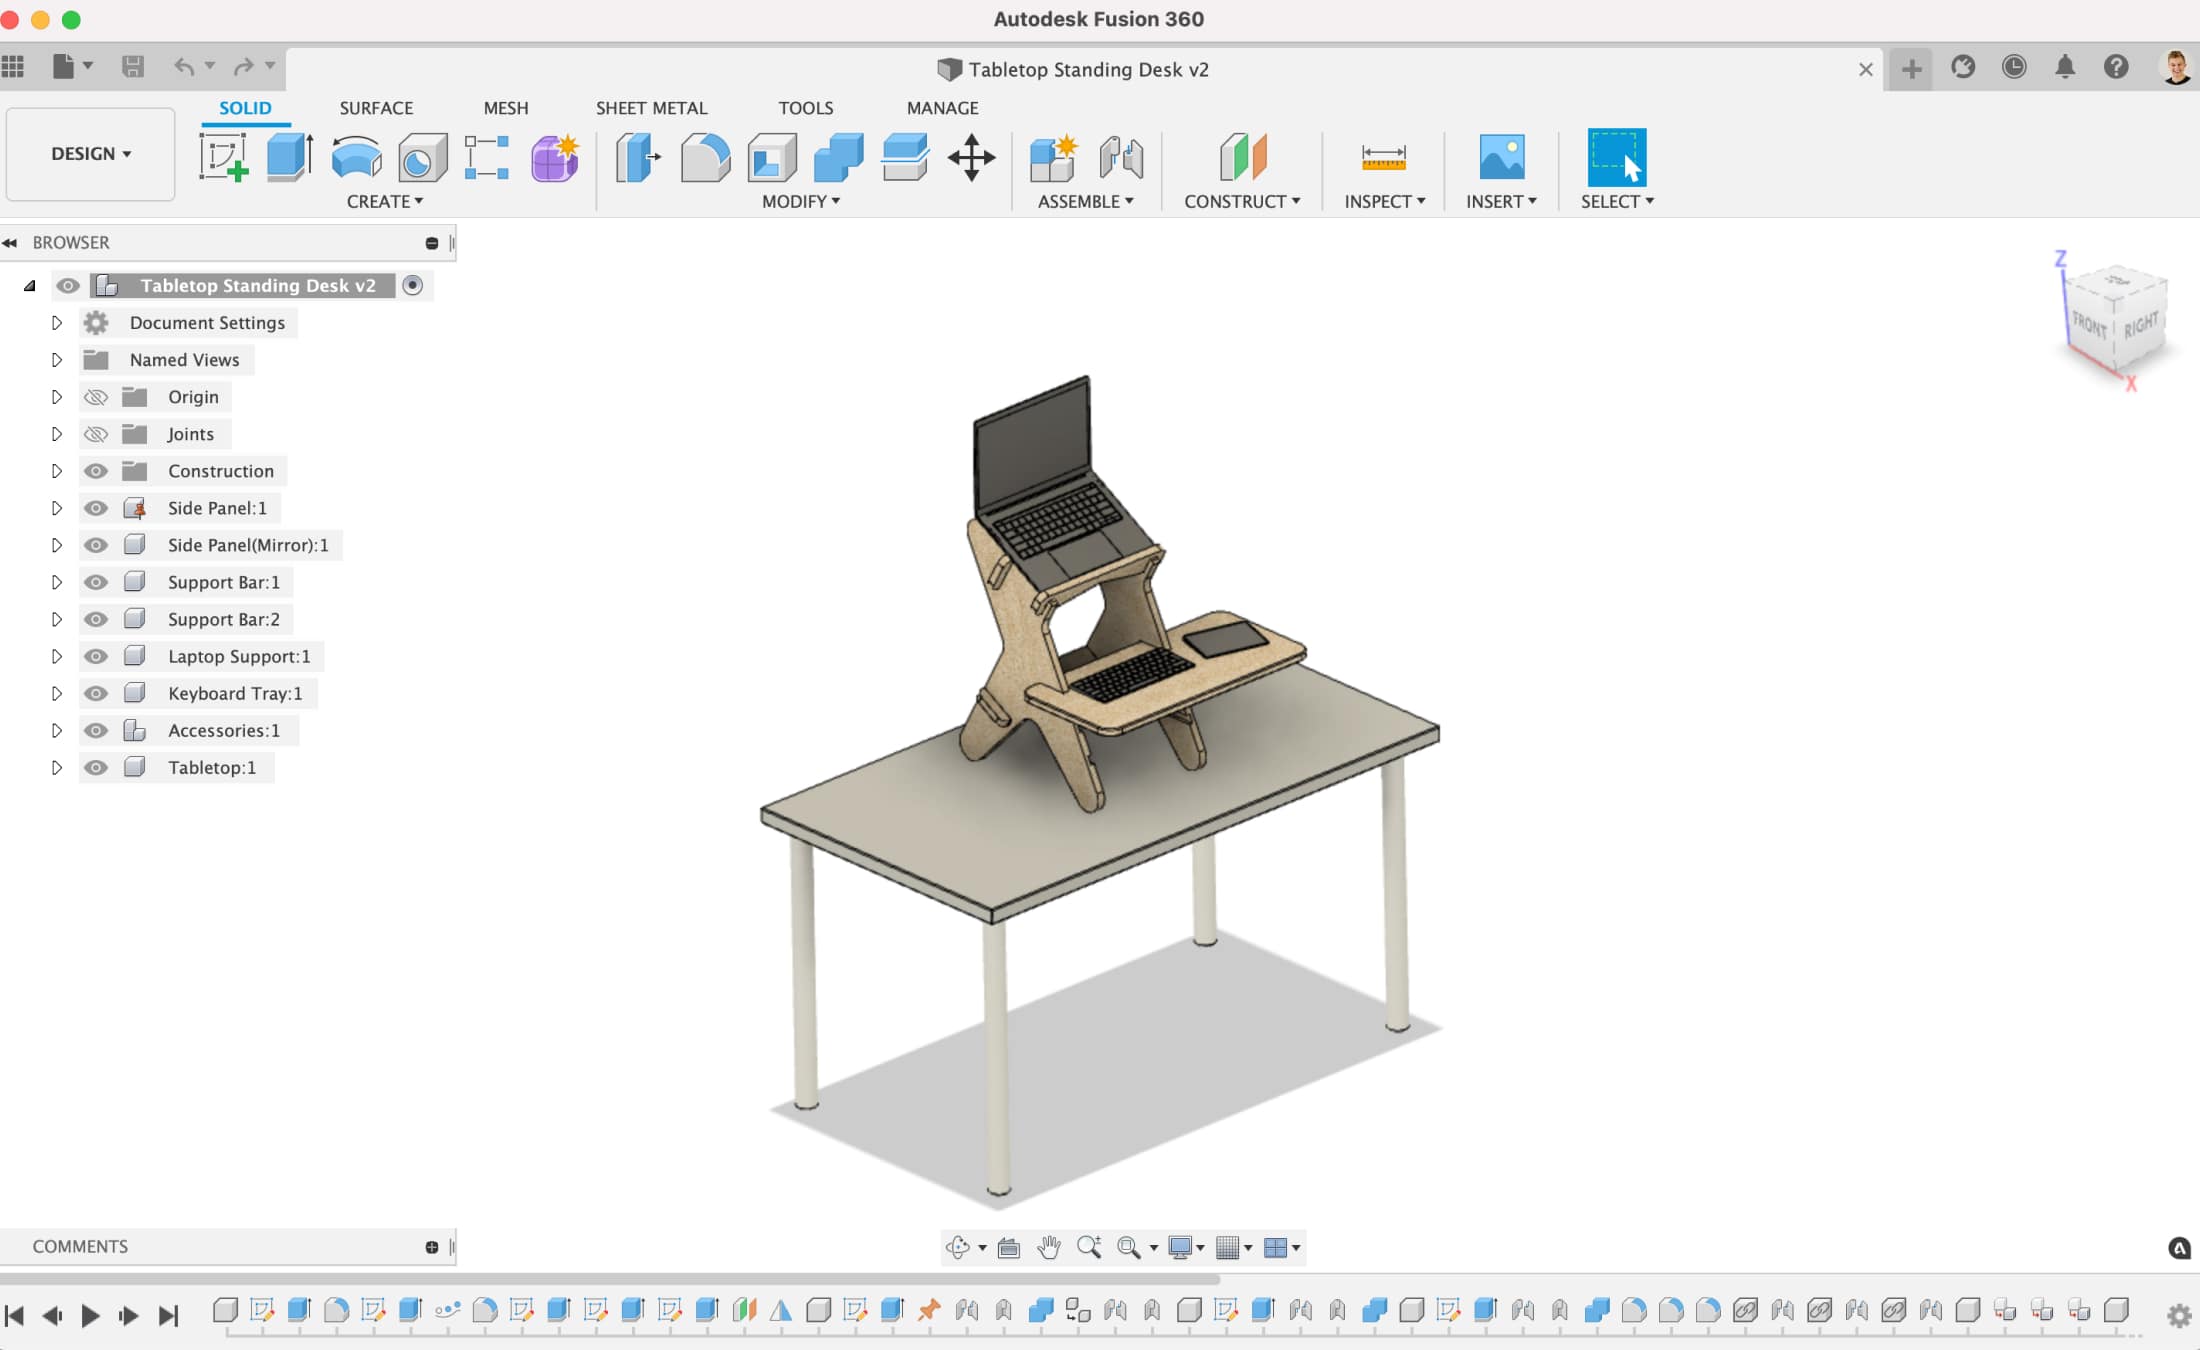 Type of Modeling is Autodesk Fusion 360